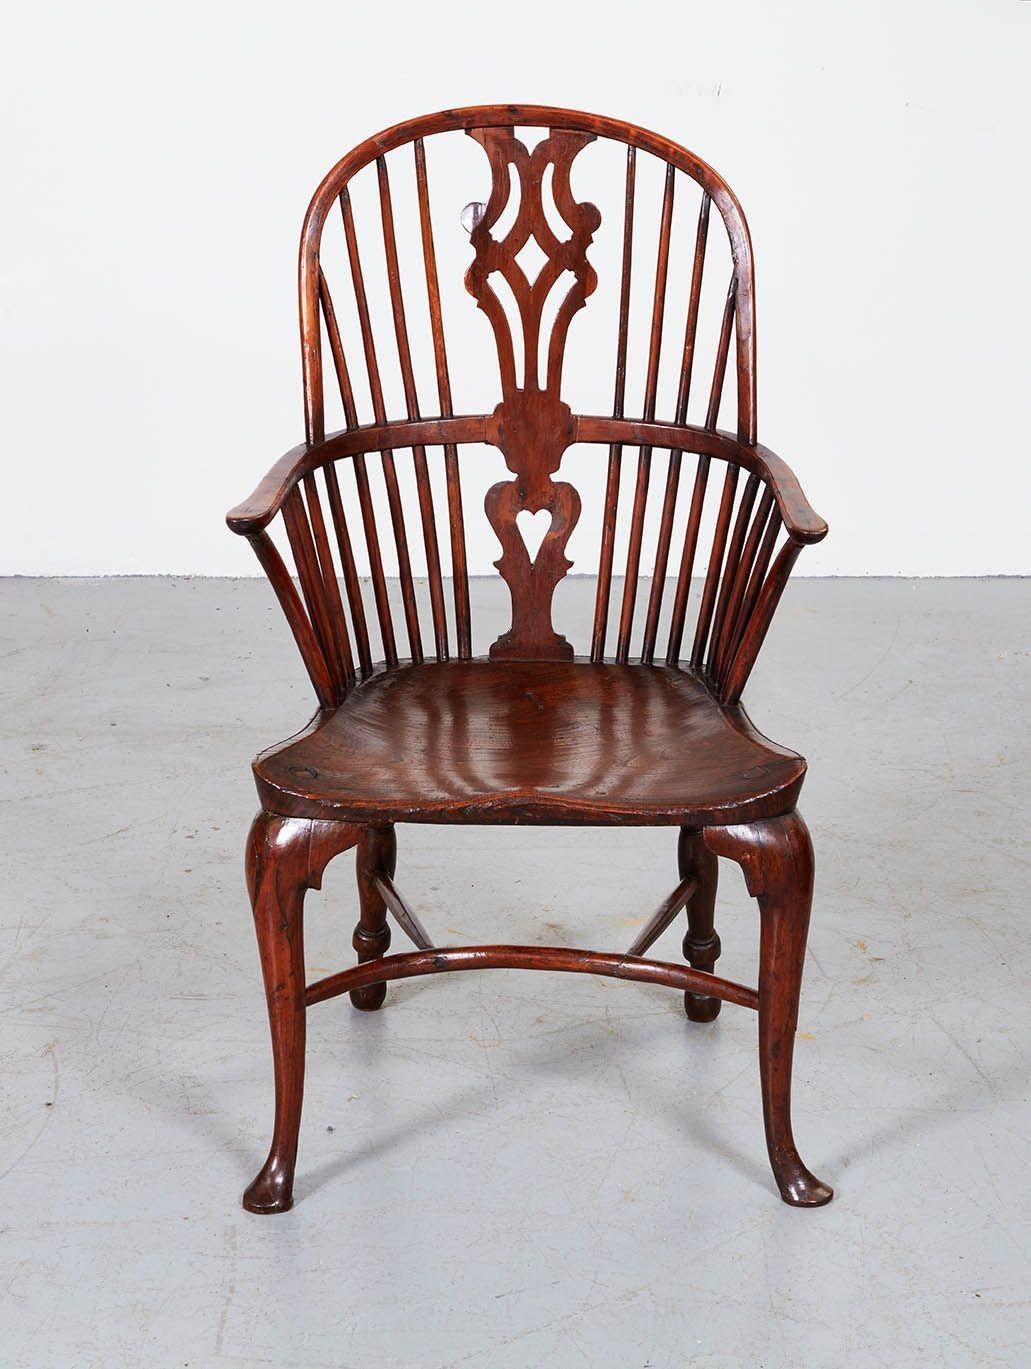 An 18th century yew wood windsor armchair having hooped spindle back with fretted central splat over saddled elm seat standing on front cabriole legs and turned back legs joined by a crinoline curved stretcher. English, George II, circa 1750.
Width: